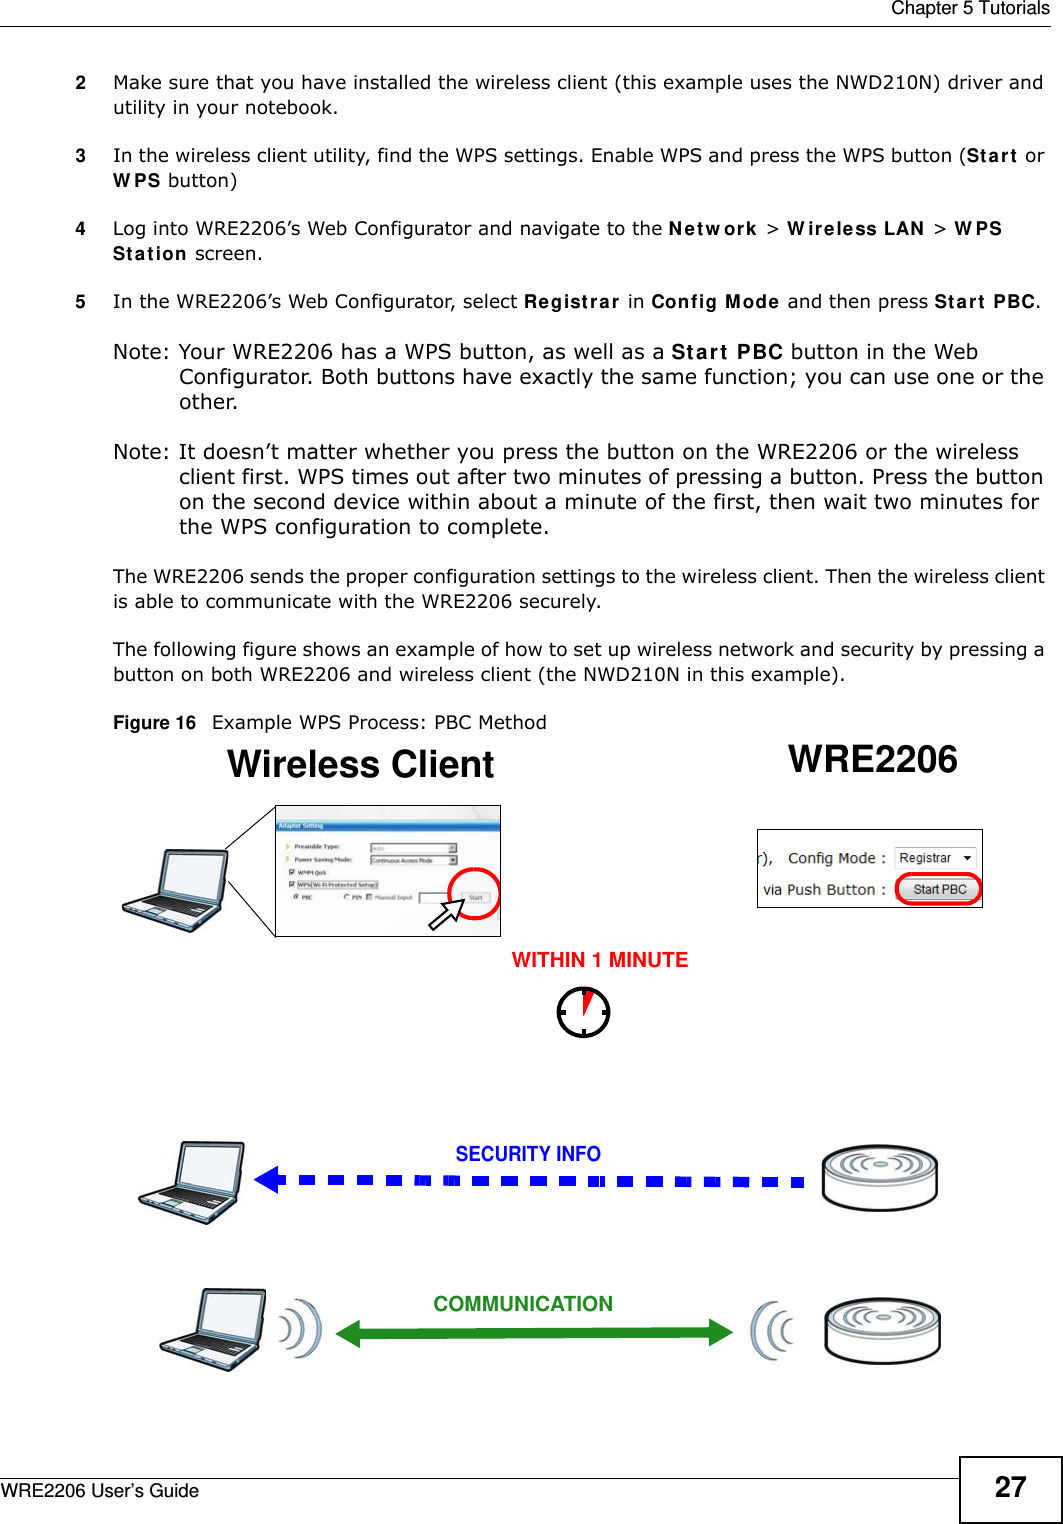  Chapter 5 TutorialsWRE2206 User’s Guide 272Make sure that you have installed the wireless client (this example uses the NWD210N) driver and utility in your notebook.3In the wireless client utility, find the WPS settings. Enable WPS and press the WPS button (St a r t  or W PS button)4Log into WRE2206’s Web Configurator and navigate to the N e t w or k  &gt; W irele ss LAN  &gt; W PS St a t ion  screen. 5In the WRE2206’s Web Configurator, select Re gist r a r in Config Mode and then press St art PBC.Note: Your WRE2206 has a WPS button, as well as a St a rt  PBC button in the Web Configurator. Both buttons have exactly the same function; you can use one or the other.Note: It doesn’t matter whether you press the button on the WRE2206 or the wireless client first. WPS times out after two minutes of pressing a button. Press the button on the second device within about a minute of the first, then wait two minutes for the WPS configuration to complete. The WRE2206 sends the proper configuration settings to the wireless client. Then the wireless client is able to communicate with the WRE2206 securely. The following figure shows an example of how to set up wireless network and security by pressing a button on both WRE2206 and wireless client (the NWD210N in this example).Figure 16   Example WPS Process: PBC MethodWireless Client WRE2206SECURITY INFOCOMMUNICATIONWITHIN 1 MINUTE